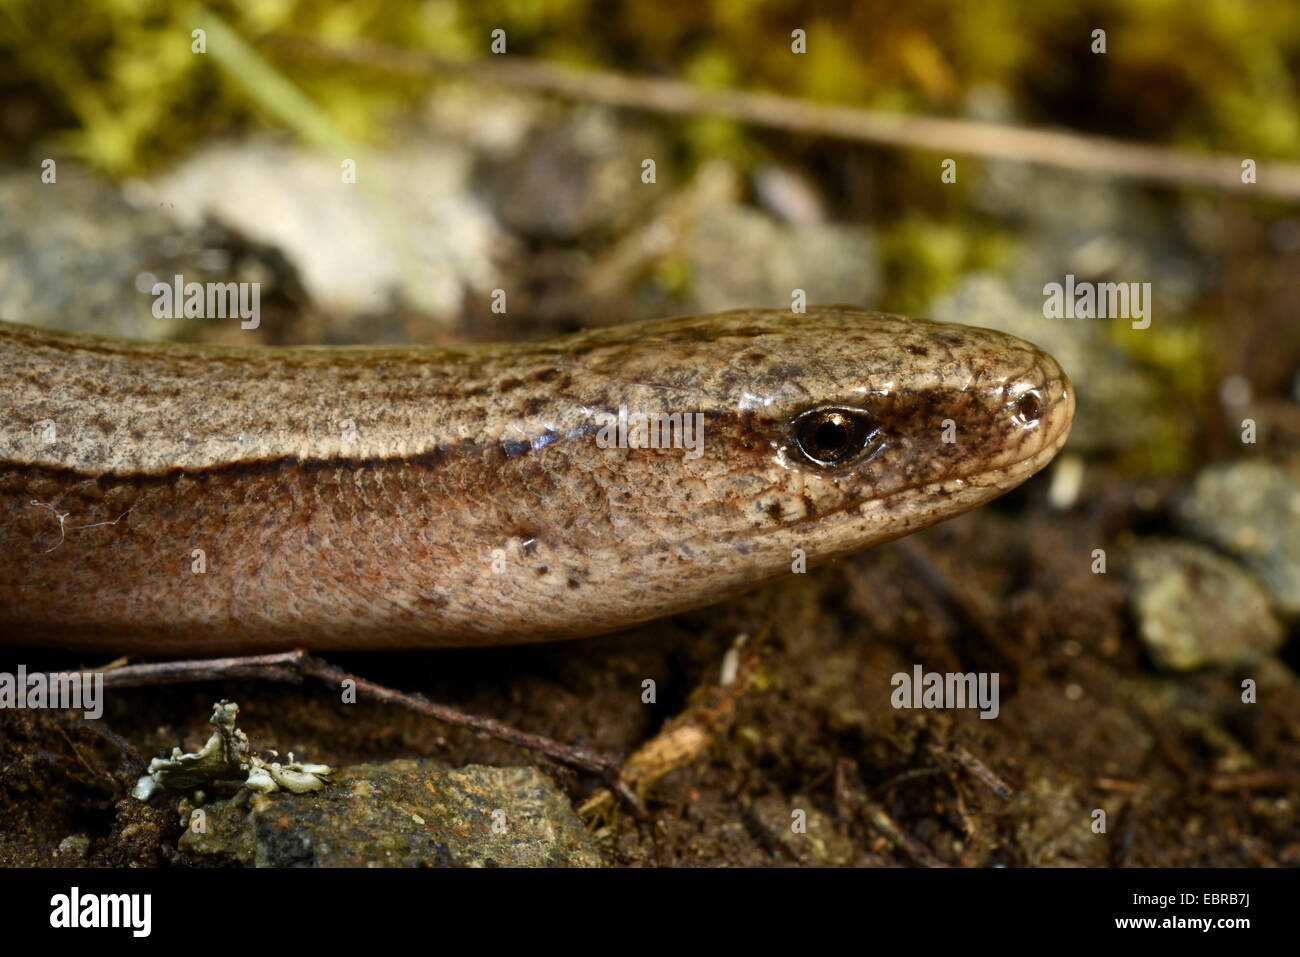 Eastern slow worm, blindworm, slow worm (Anguis fragilis colchica, Anguis colchica), portrait of a female slow worm with visible earhole, Bulgaria, Biosphaerenreservat Ropotamo Stock Photo